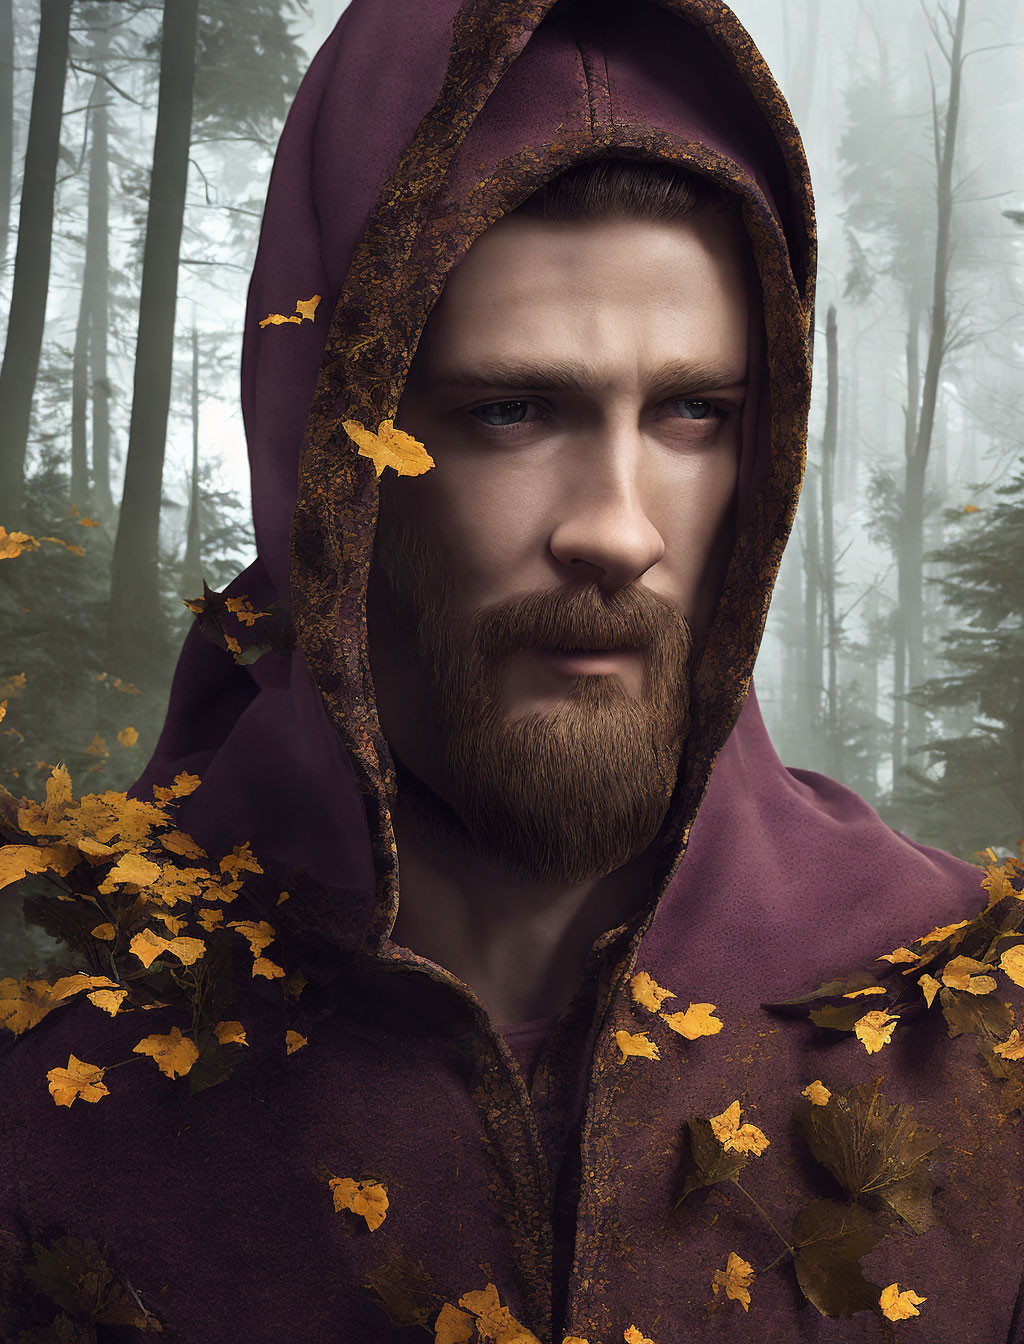 Bearded man in hooded cloak with golden leaves in misty forest